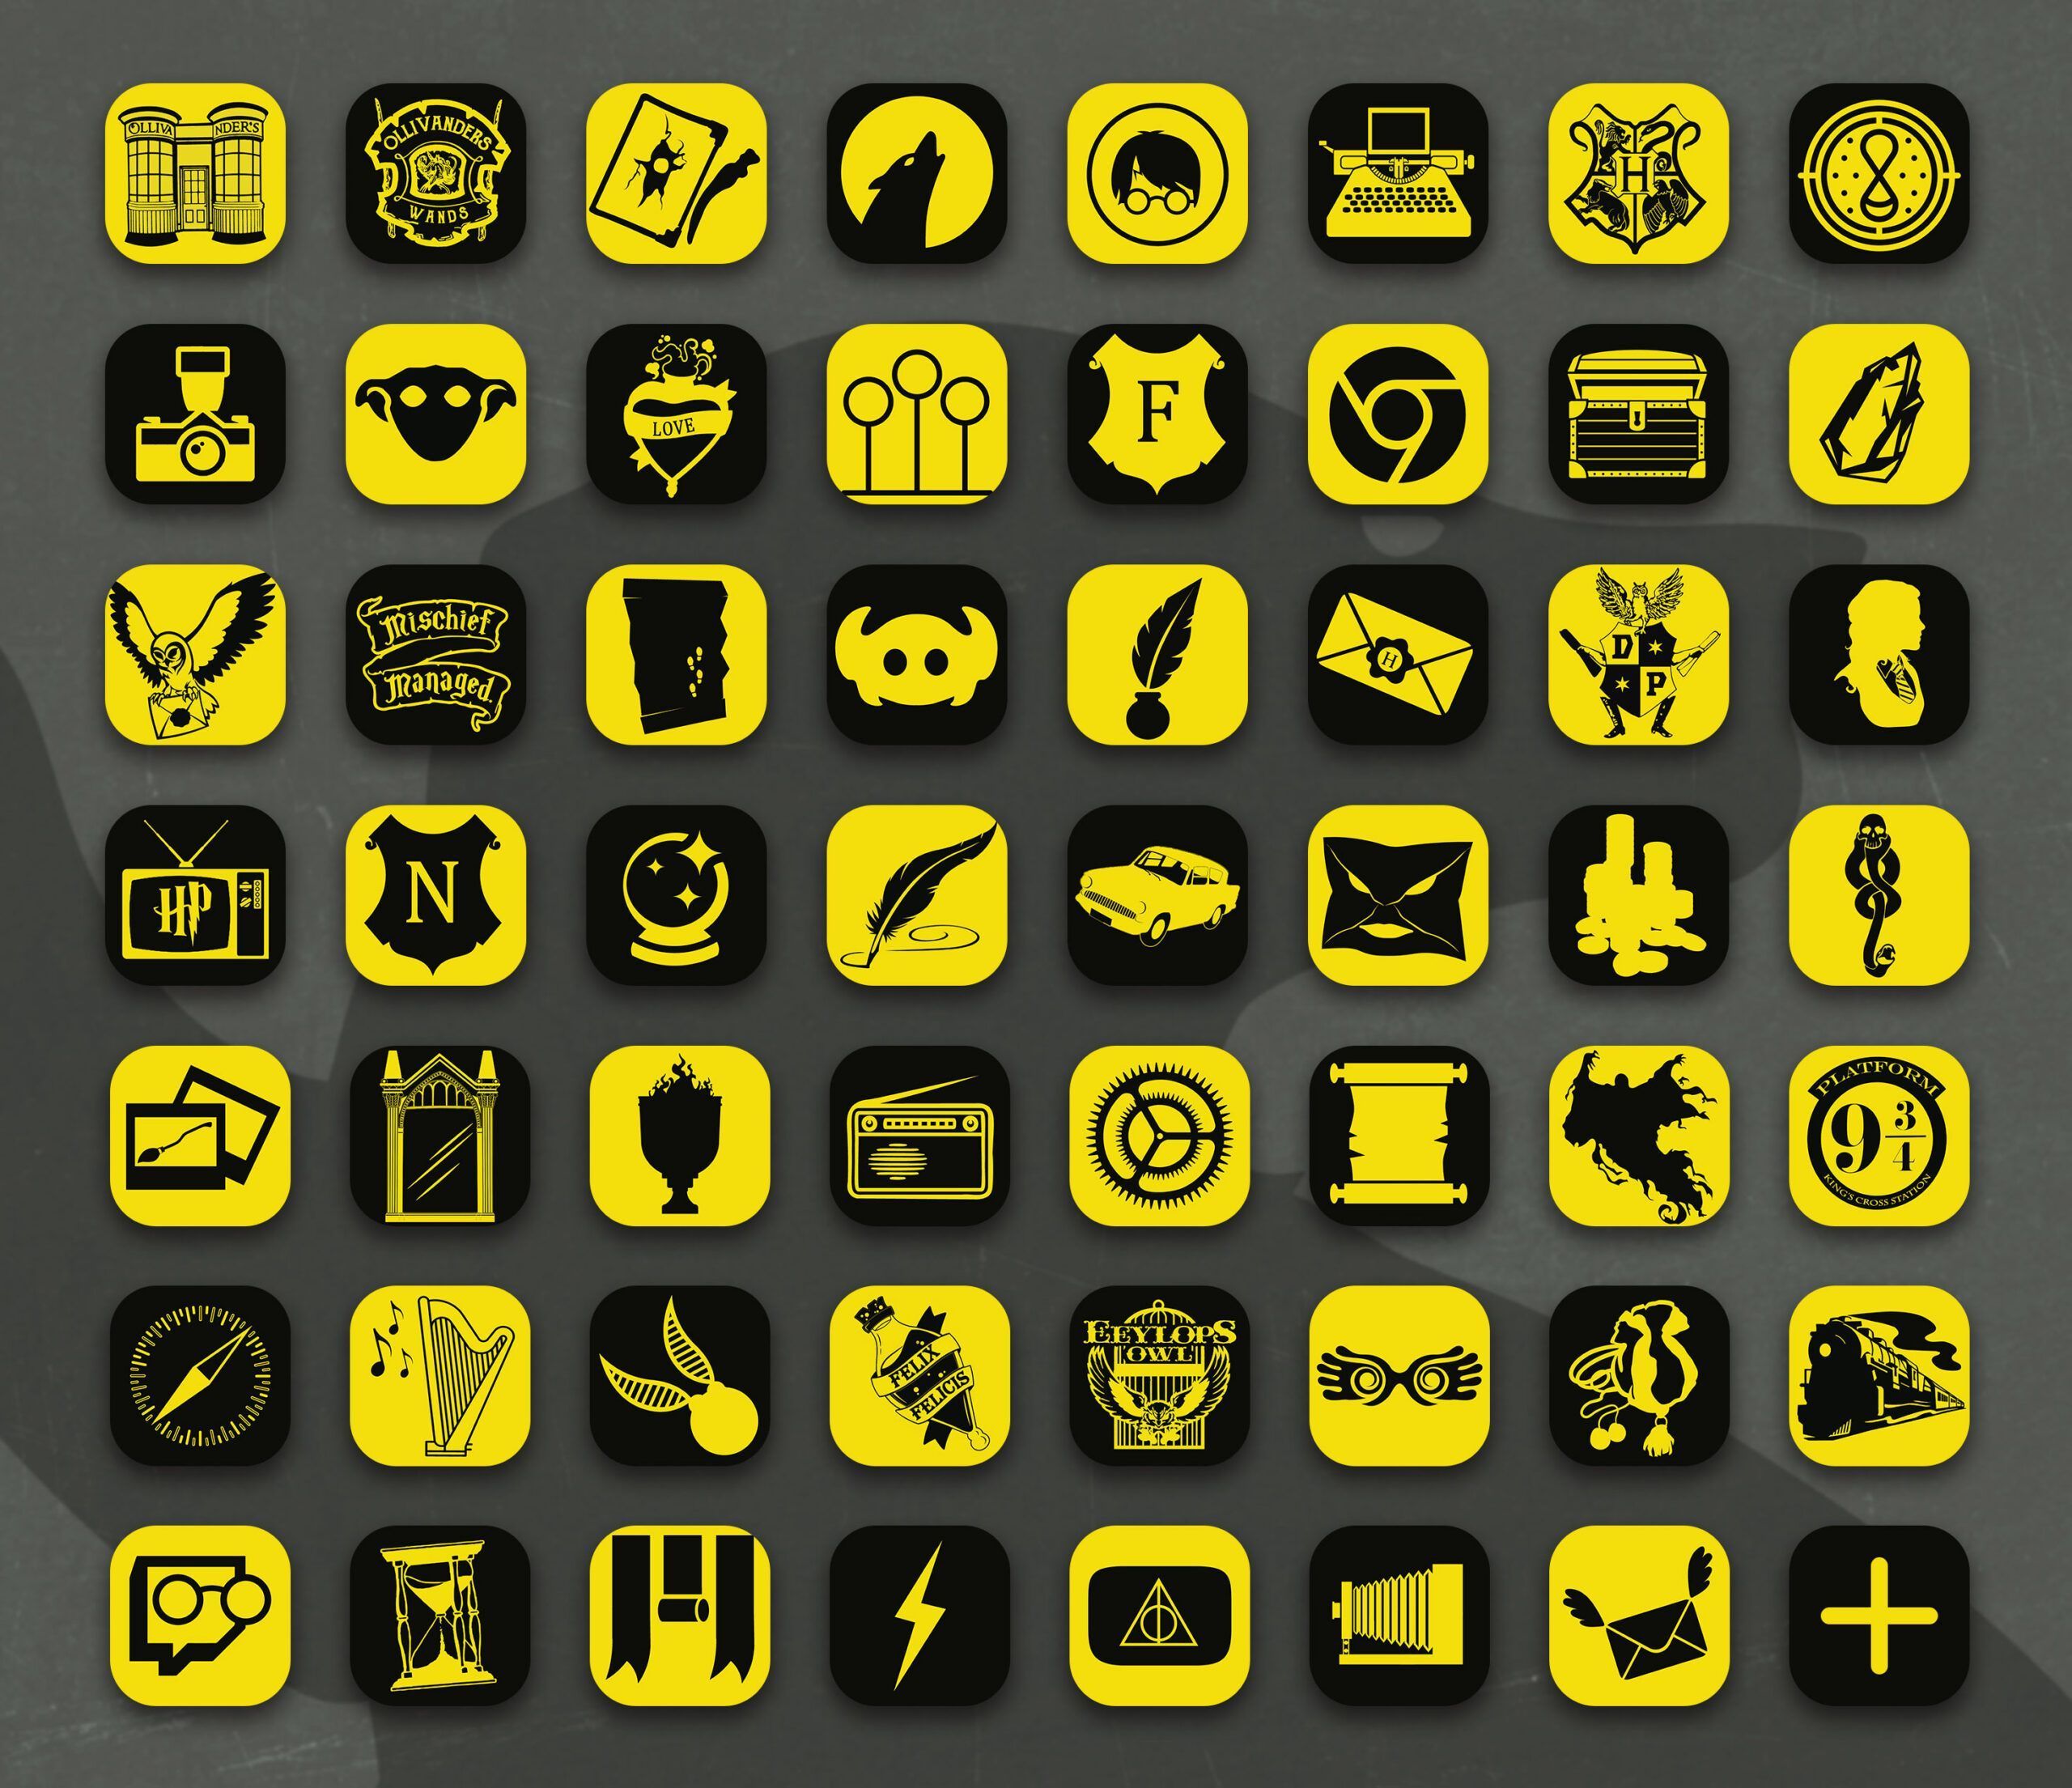 A collection of icons with yellow and black backgrounds - Hufflepuff